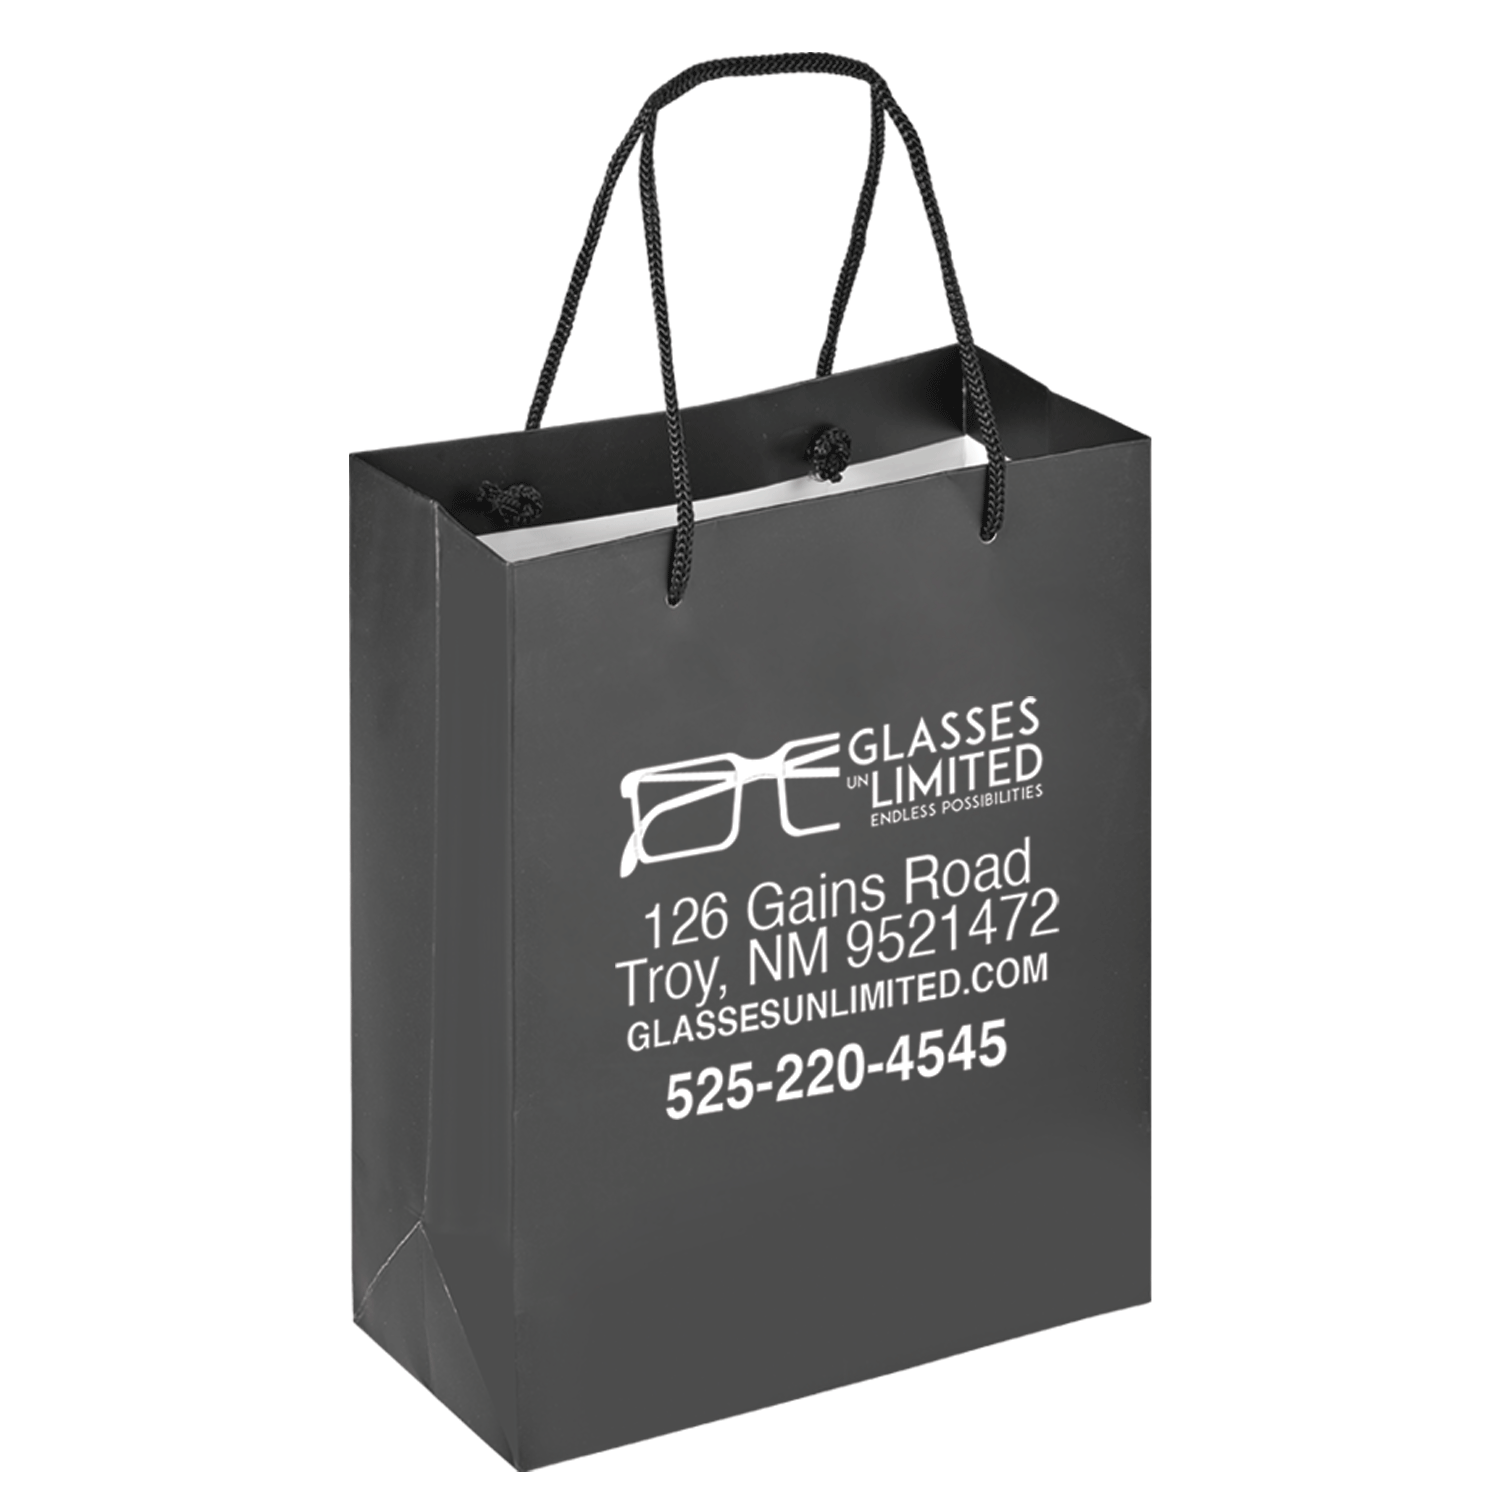 Boutique Imprinted Shopping Bags Black - Laminated (Large) [Min. Order Qty: 500 Bags]